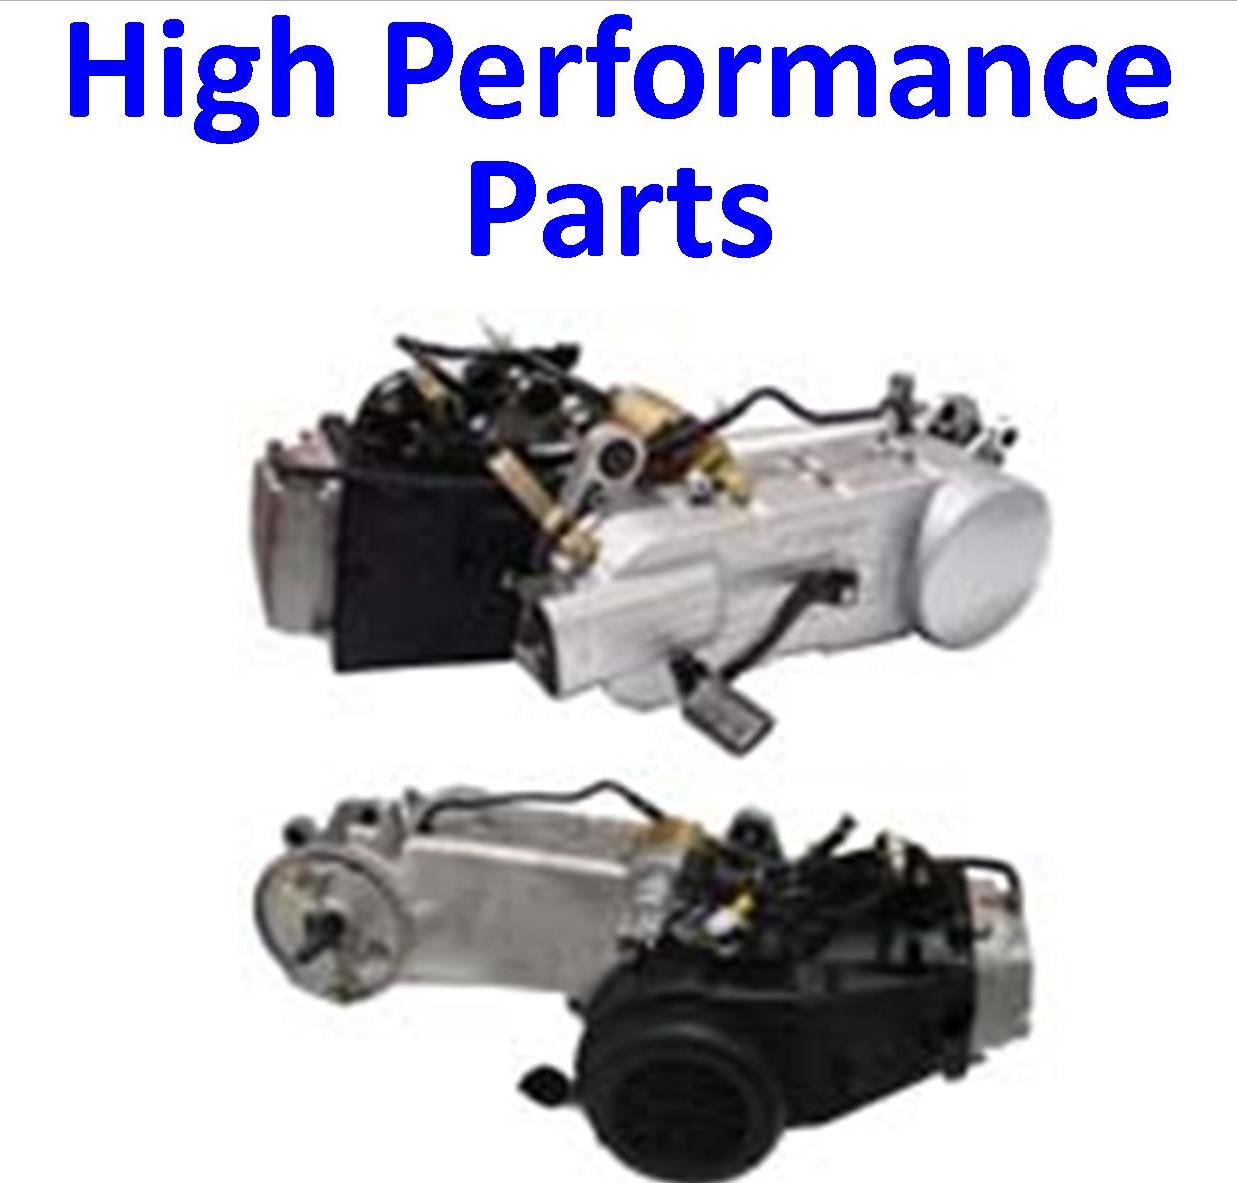 High Performance Parts 125cc-180cc GY6 Type Engines